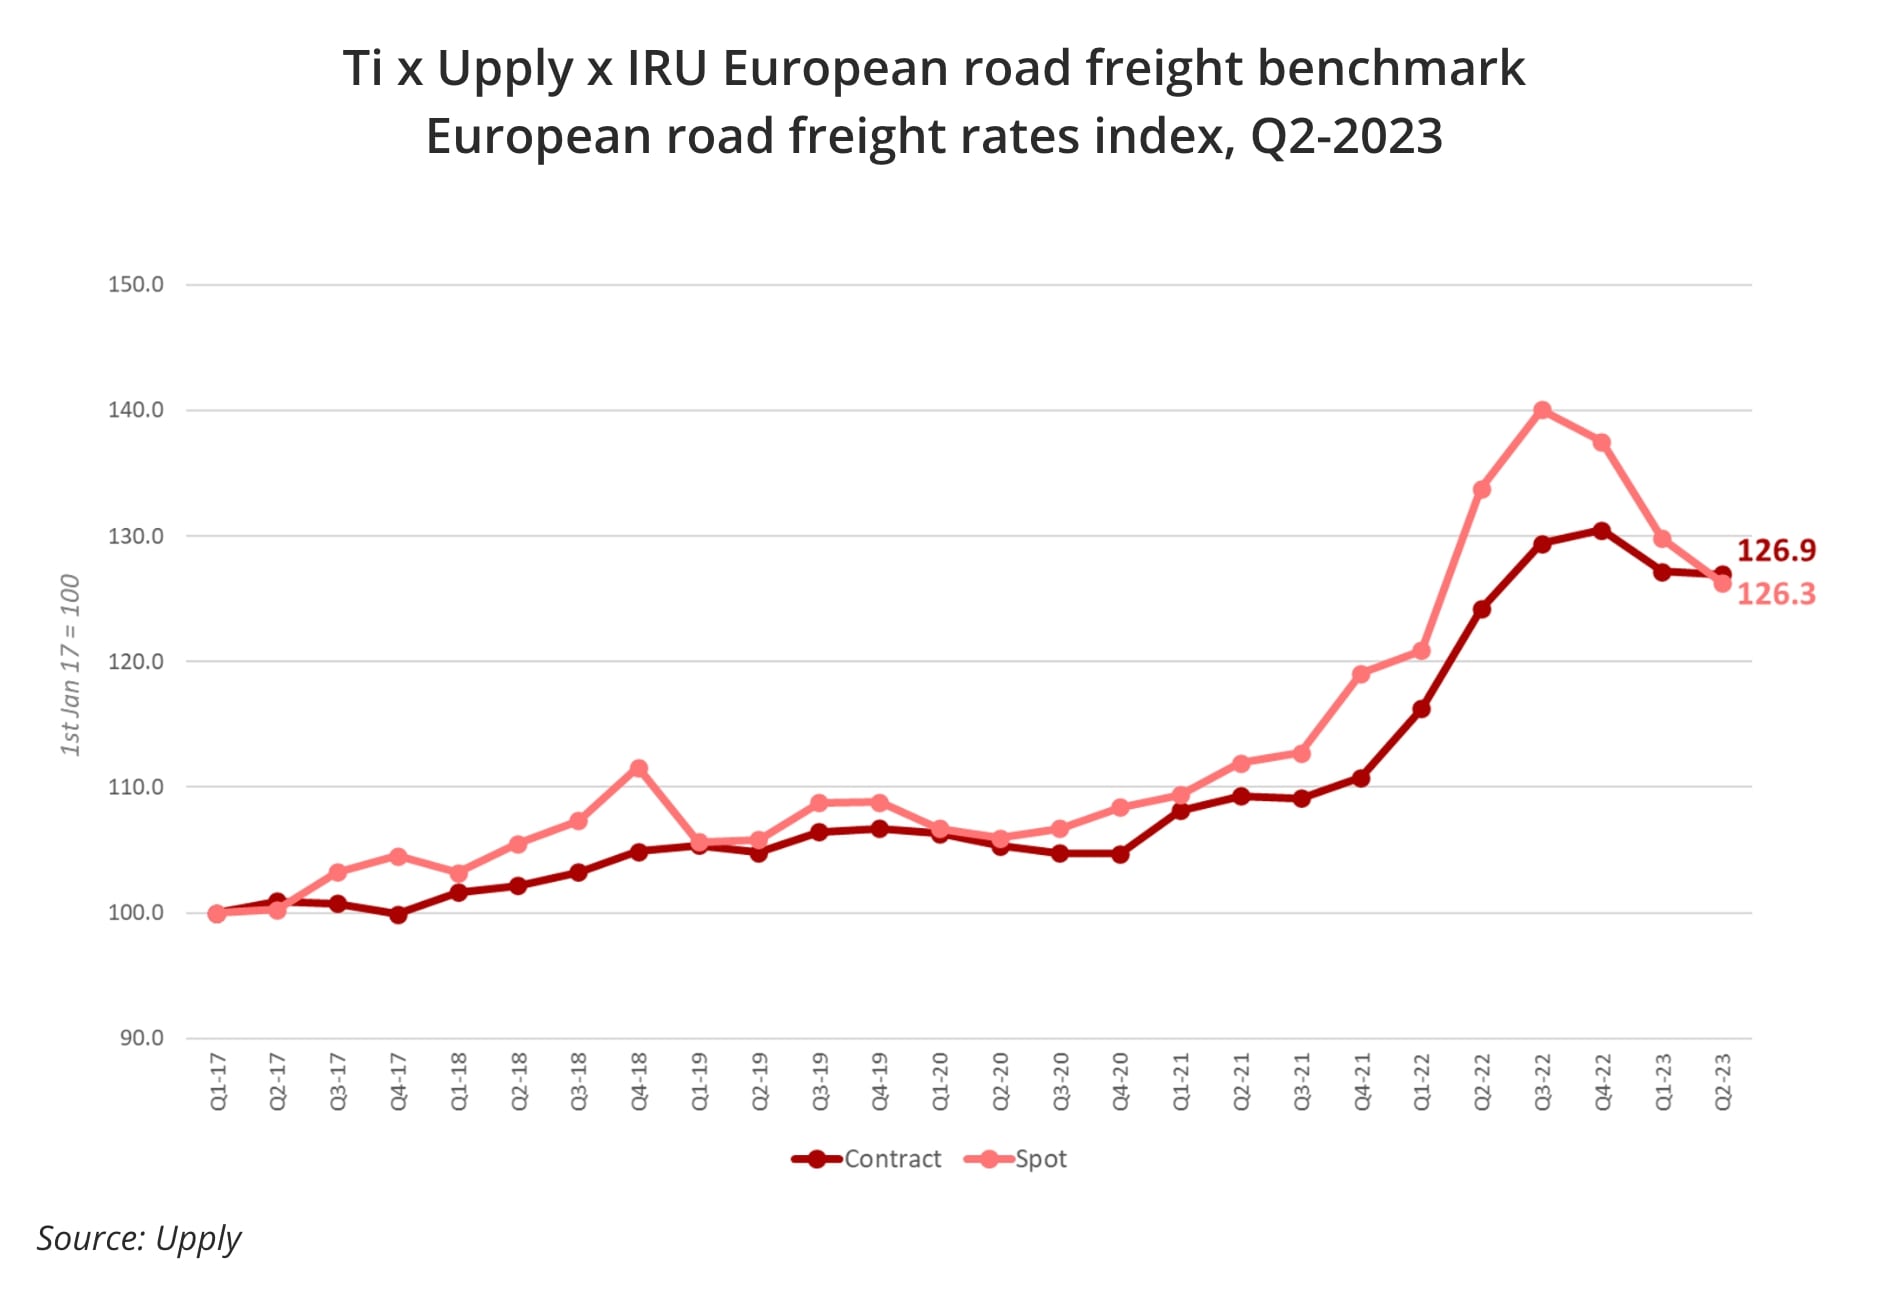 European-road-freight-rates-benchmark-spot-contract-indexes-q2-2023-upply.